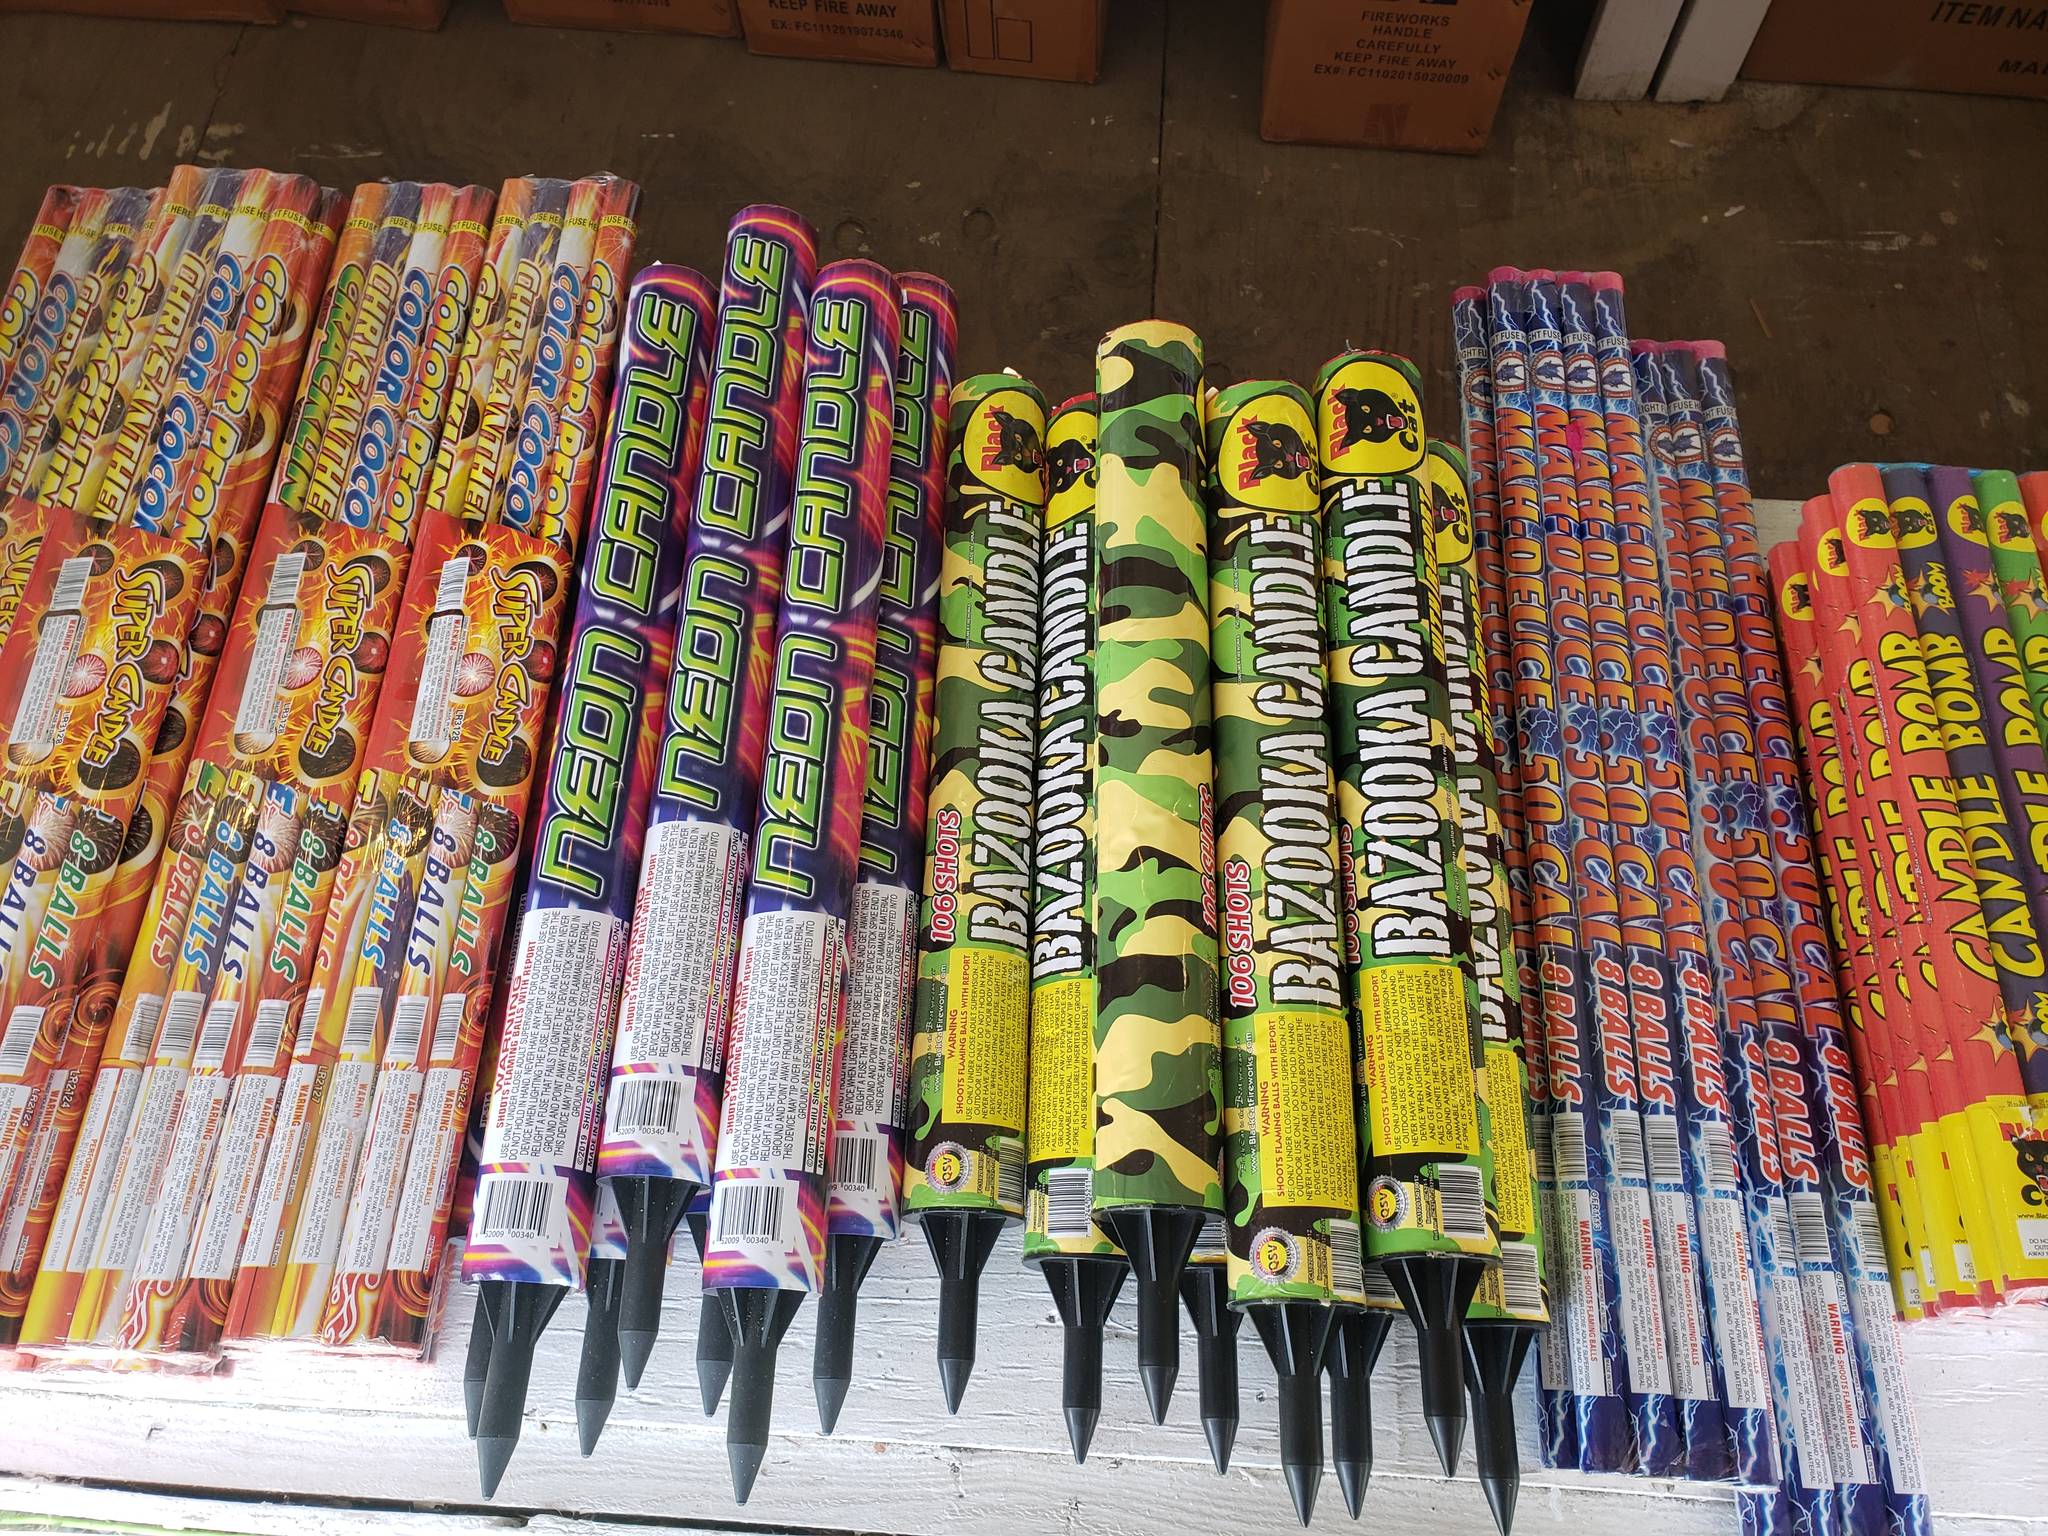 Chiquiti Fireworks sales boom in absence of organized displays